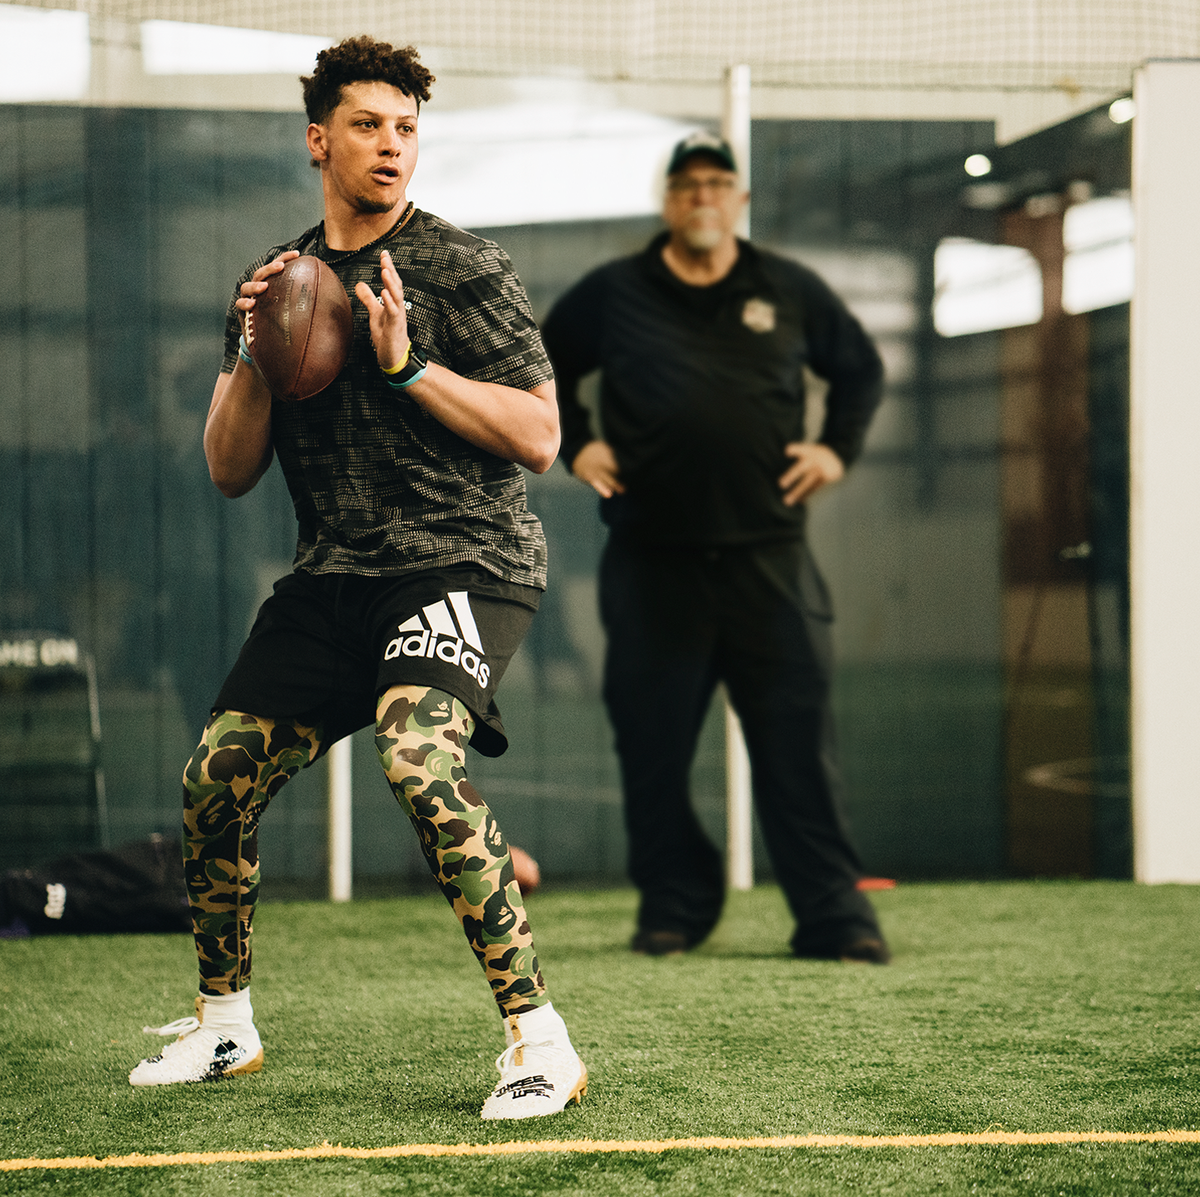 He felt how much I love football - When Patrick Mahomes' dad helped him  choose NFL career over baseball